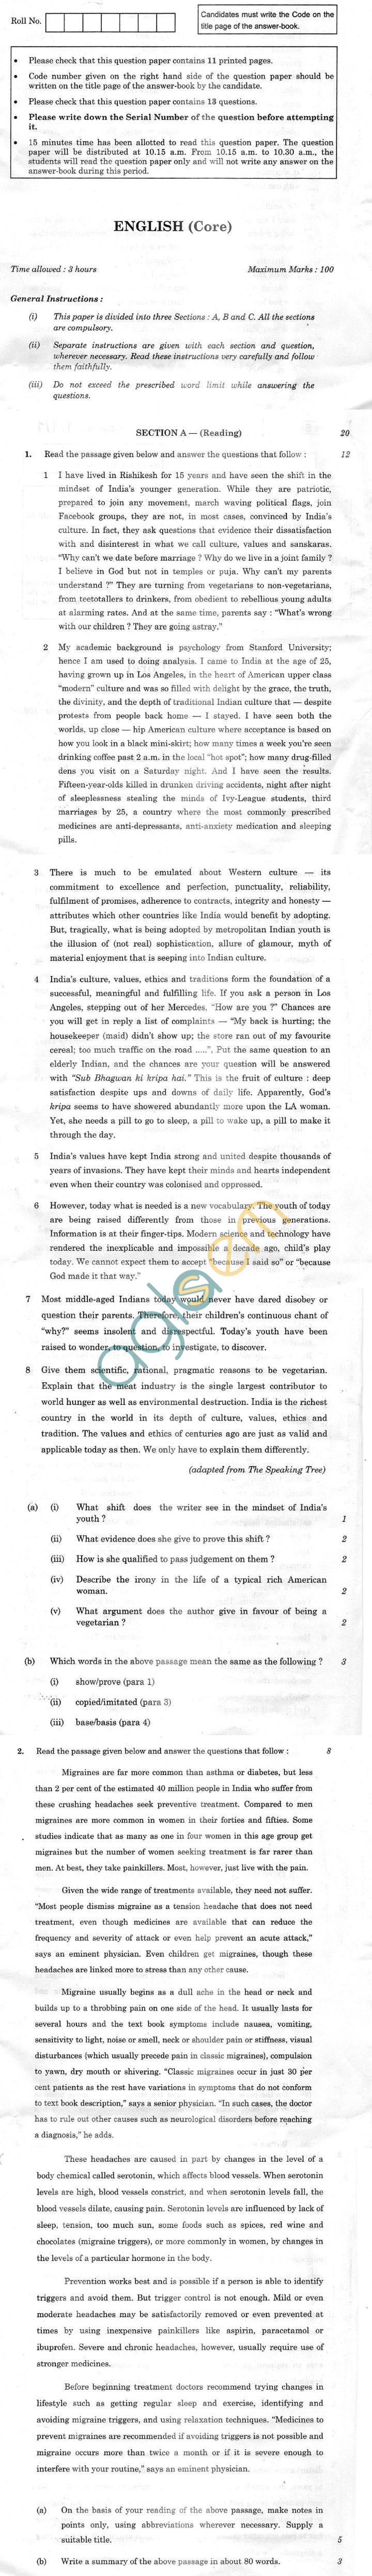 CBSE Compartment Exam 2013 Class XII Question Paper - English (Core)